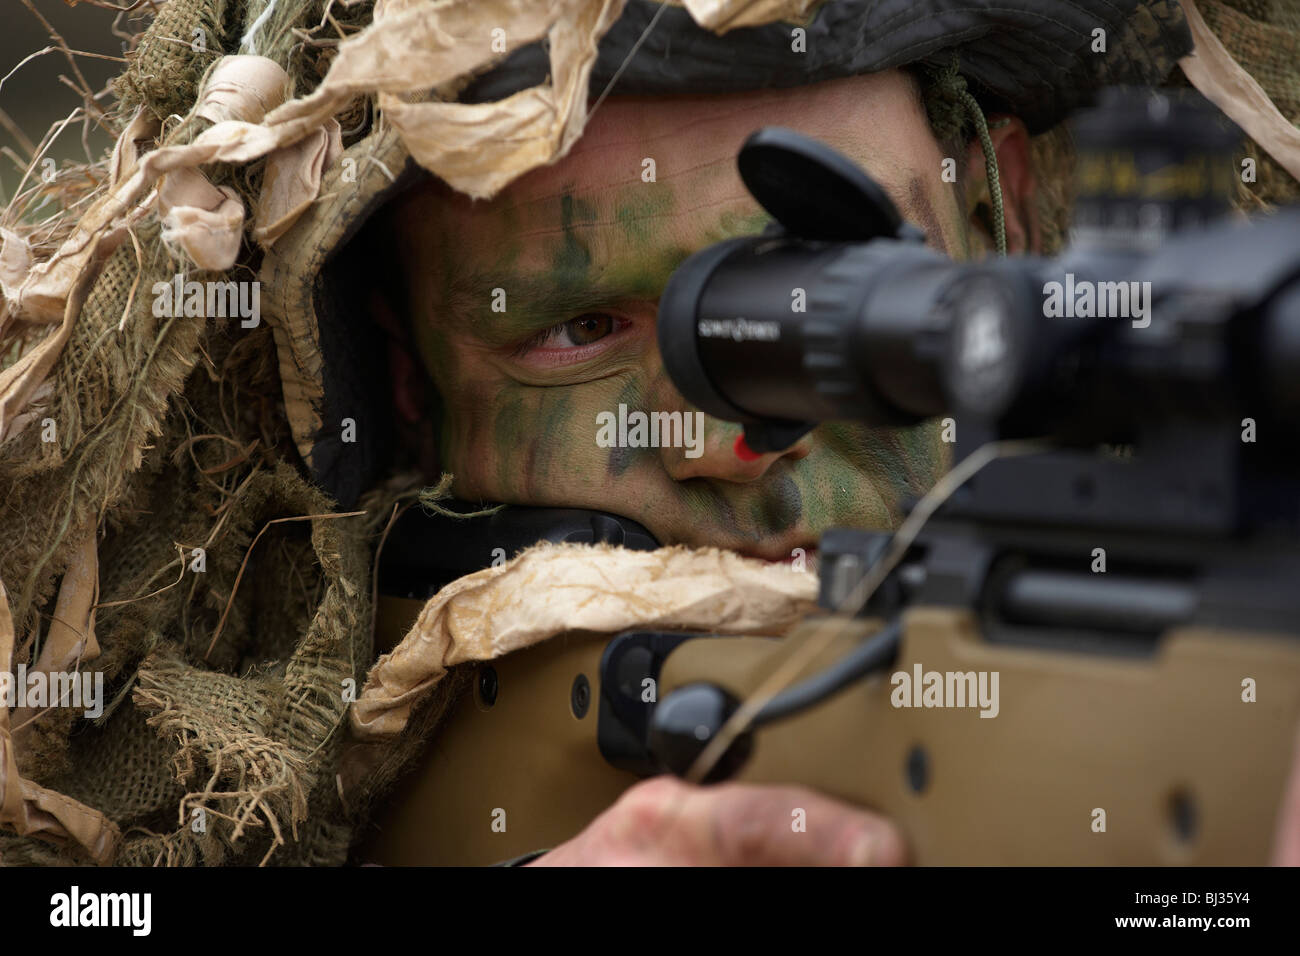 Lying in undergrowth, a camouflaged British infantry soldier is seen looking down the telescopic sight of a L115A3 rifle. Stock Photo